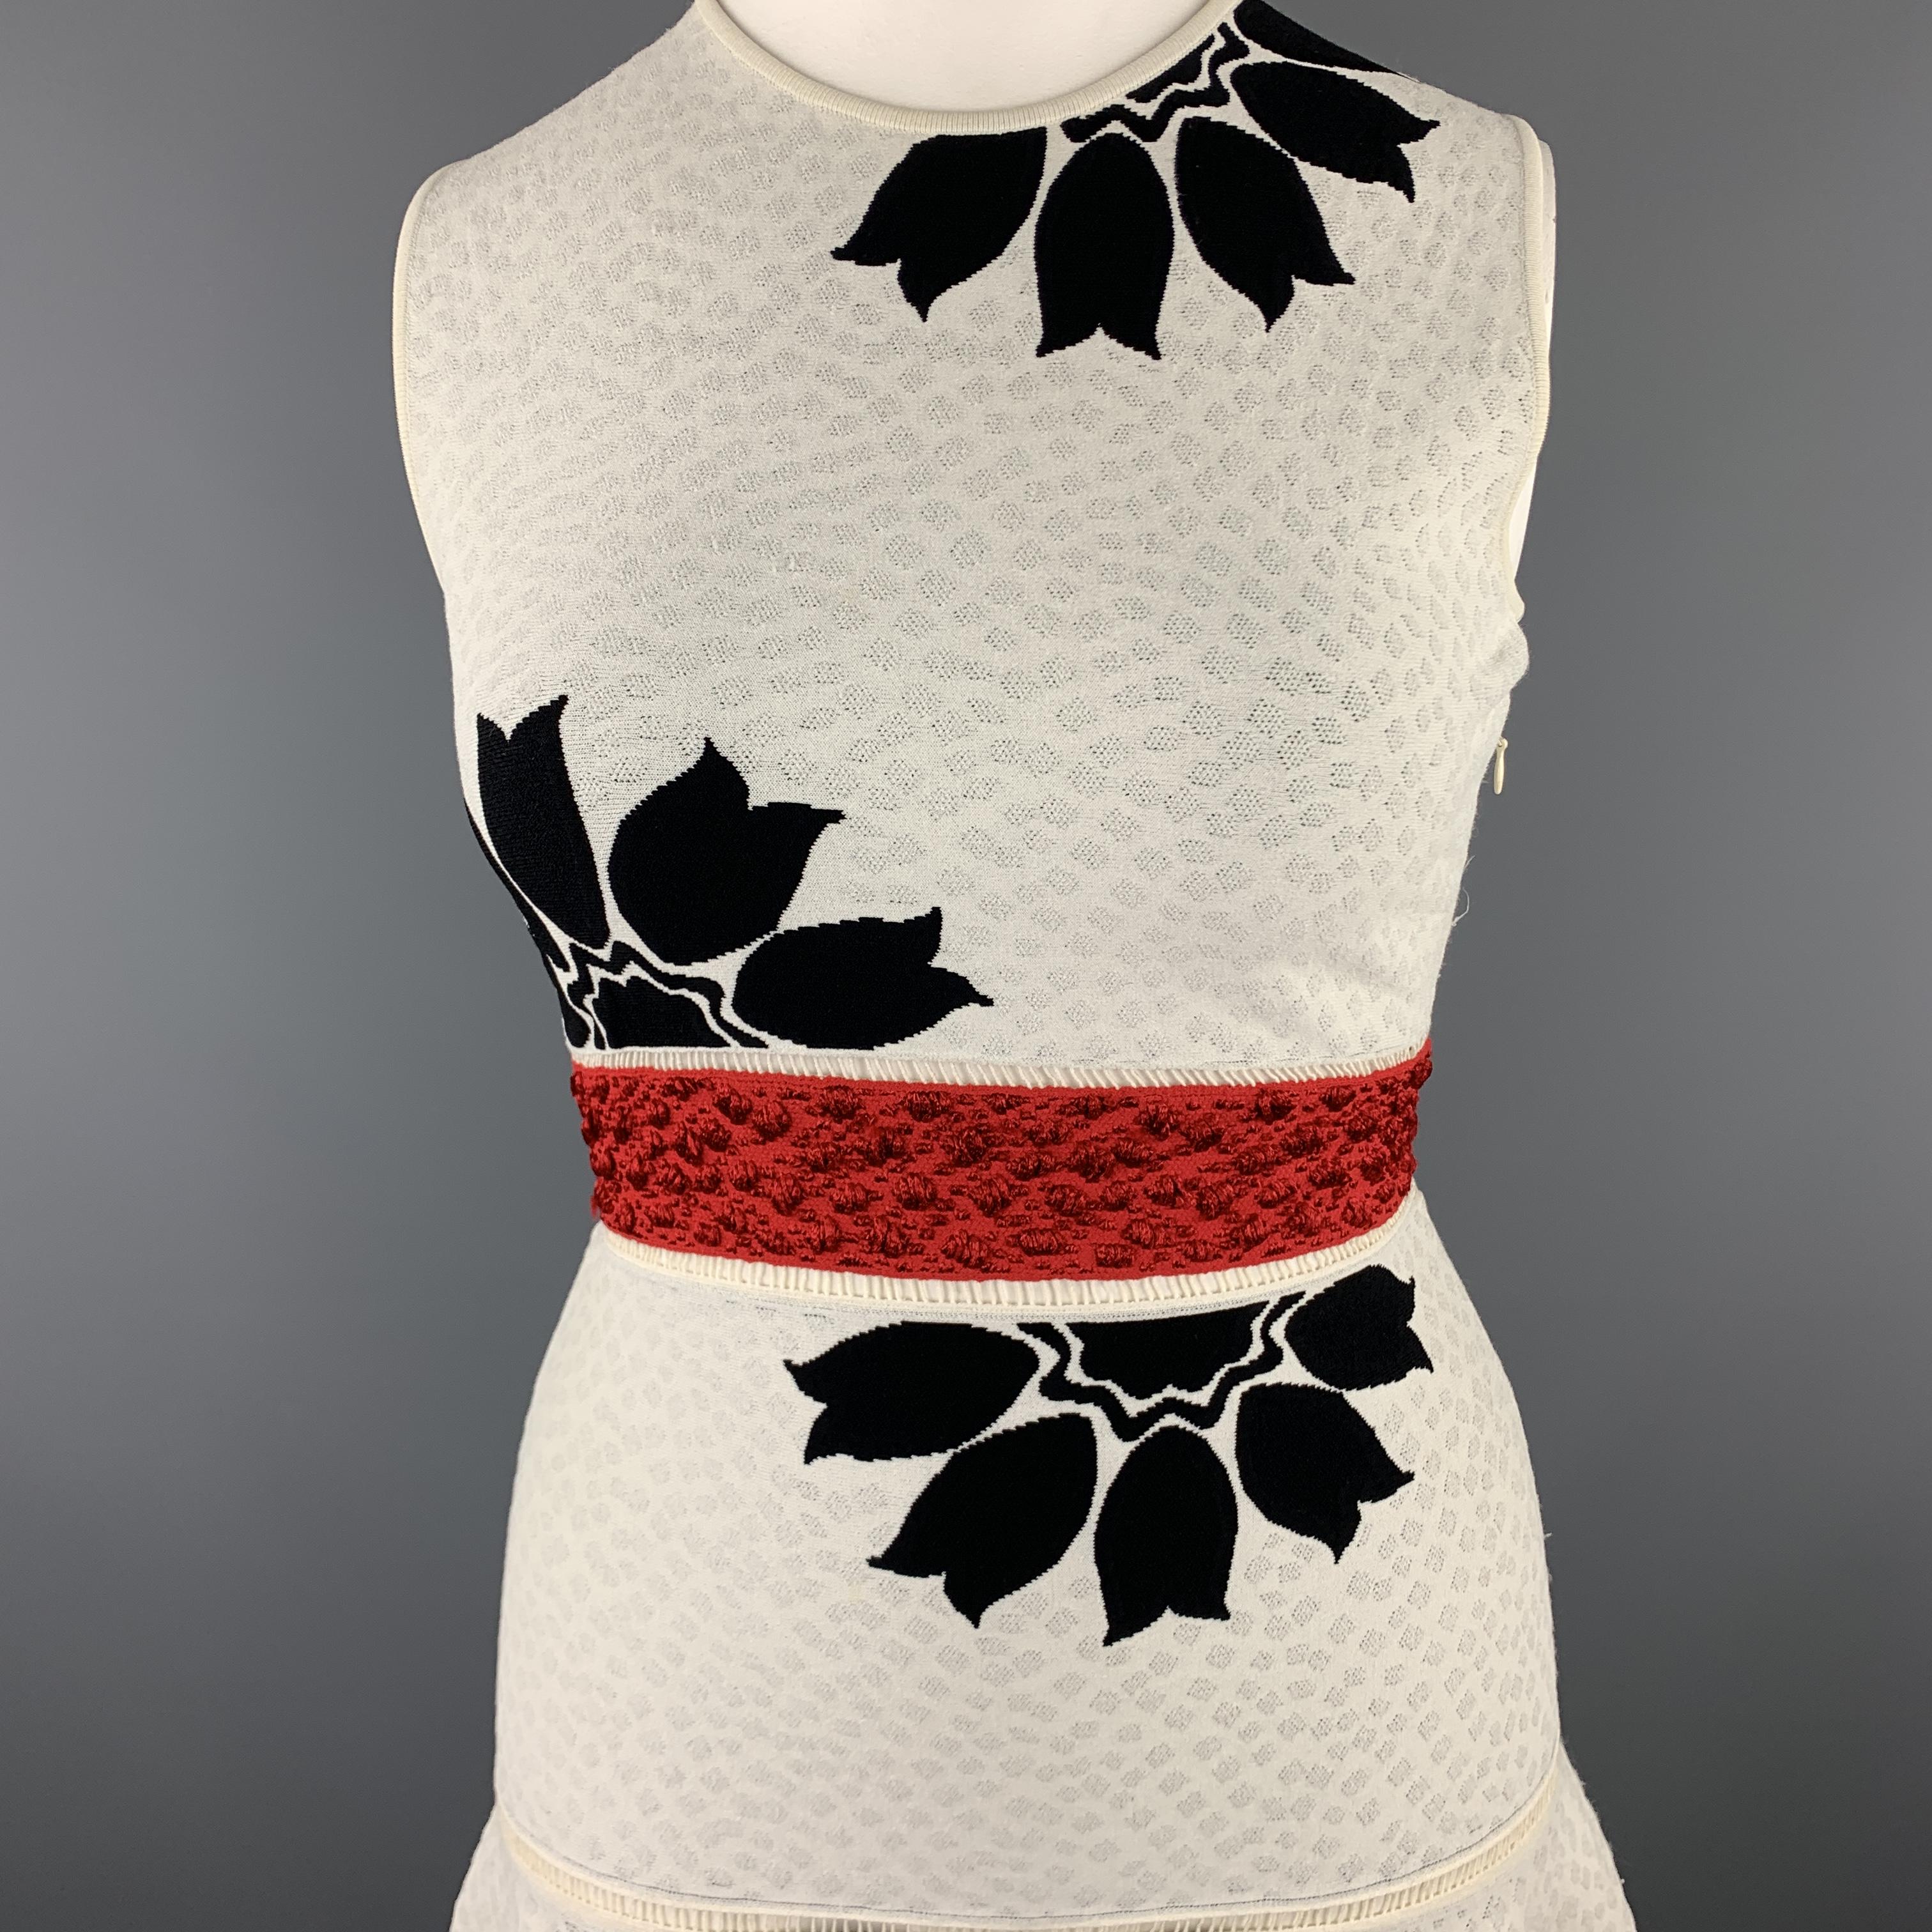 ALEXANDER MCQUEEN cocktail dress comes in off white textured stretch knit with a black floral pattern throughout, red belt panel, fit to flair ruffled skirt, and cutout trim. Made in Italy.

Excellent Pre-Owned Condition.
Marked: